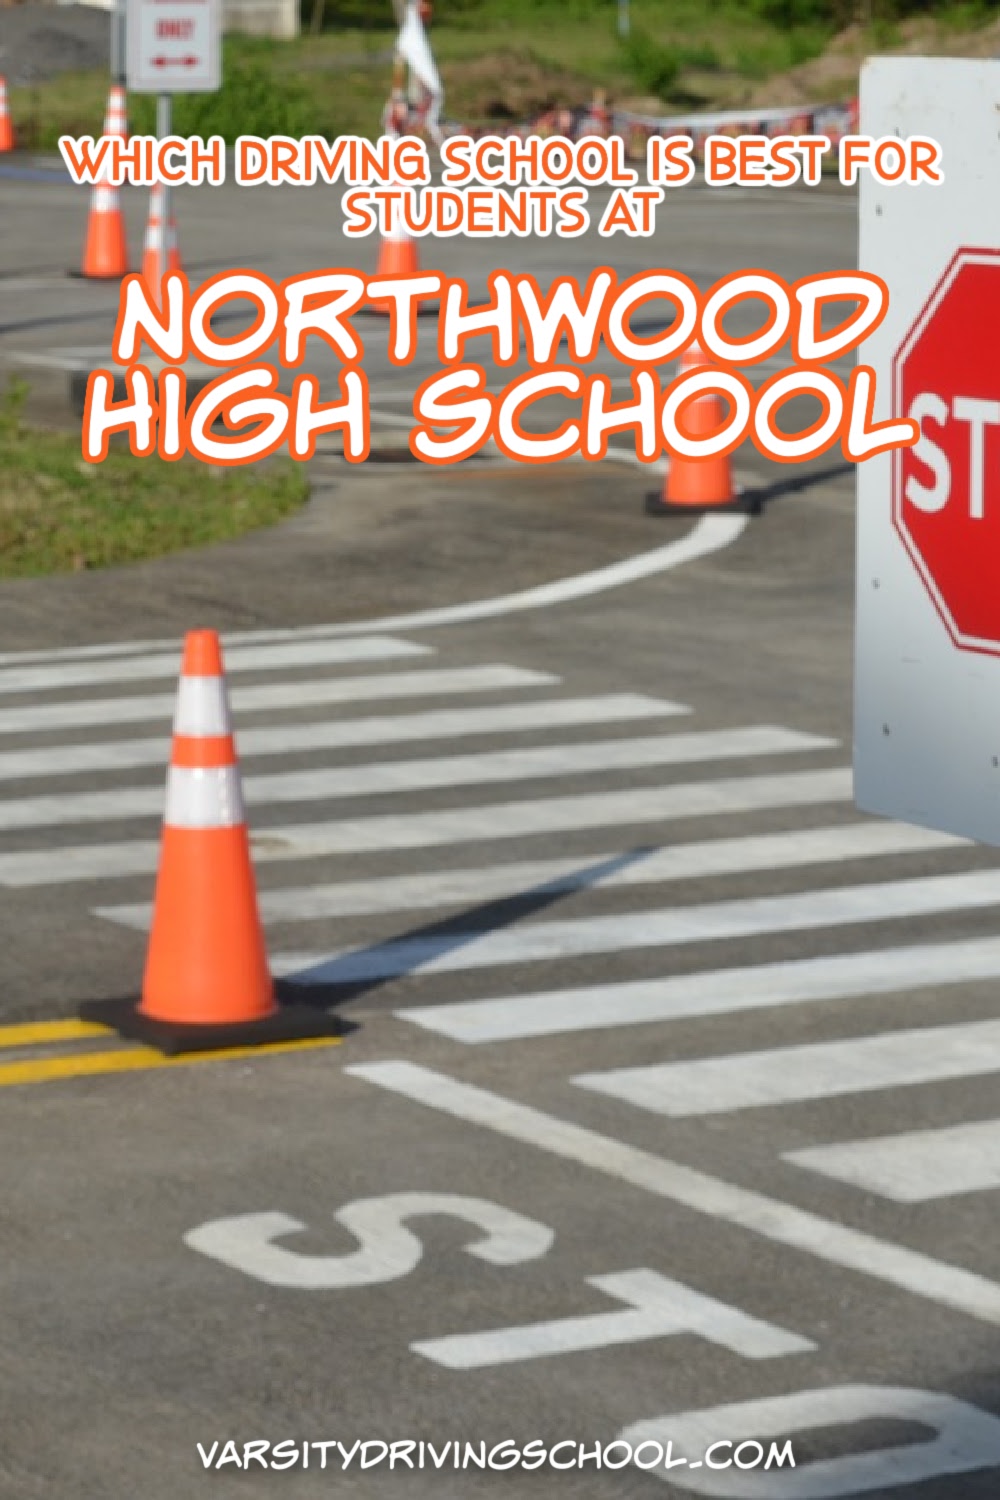 Which driving school for Northwood High School Irvine is the best option? Varsity Driving School is the answer.